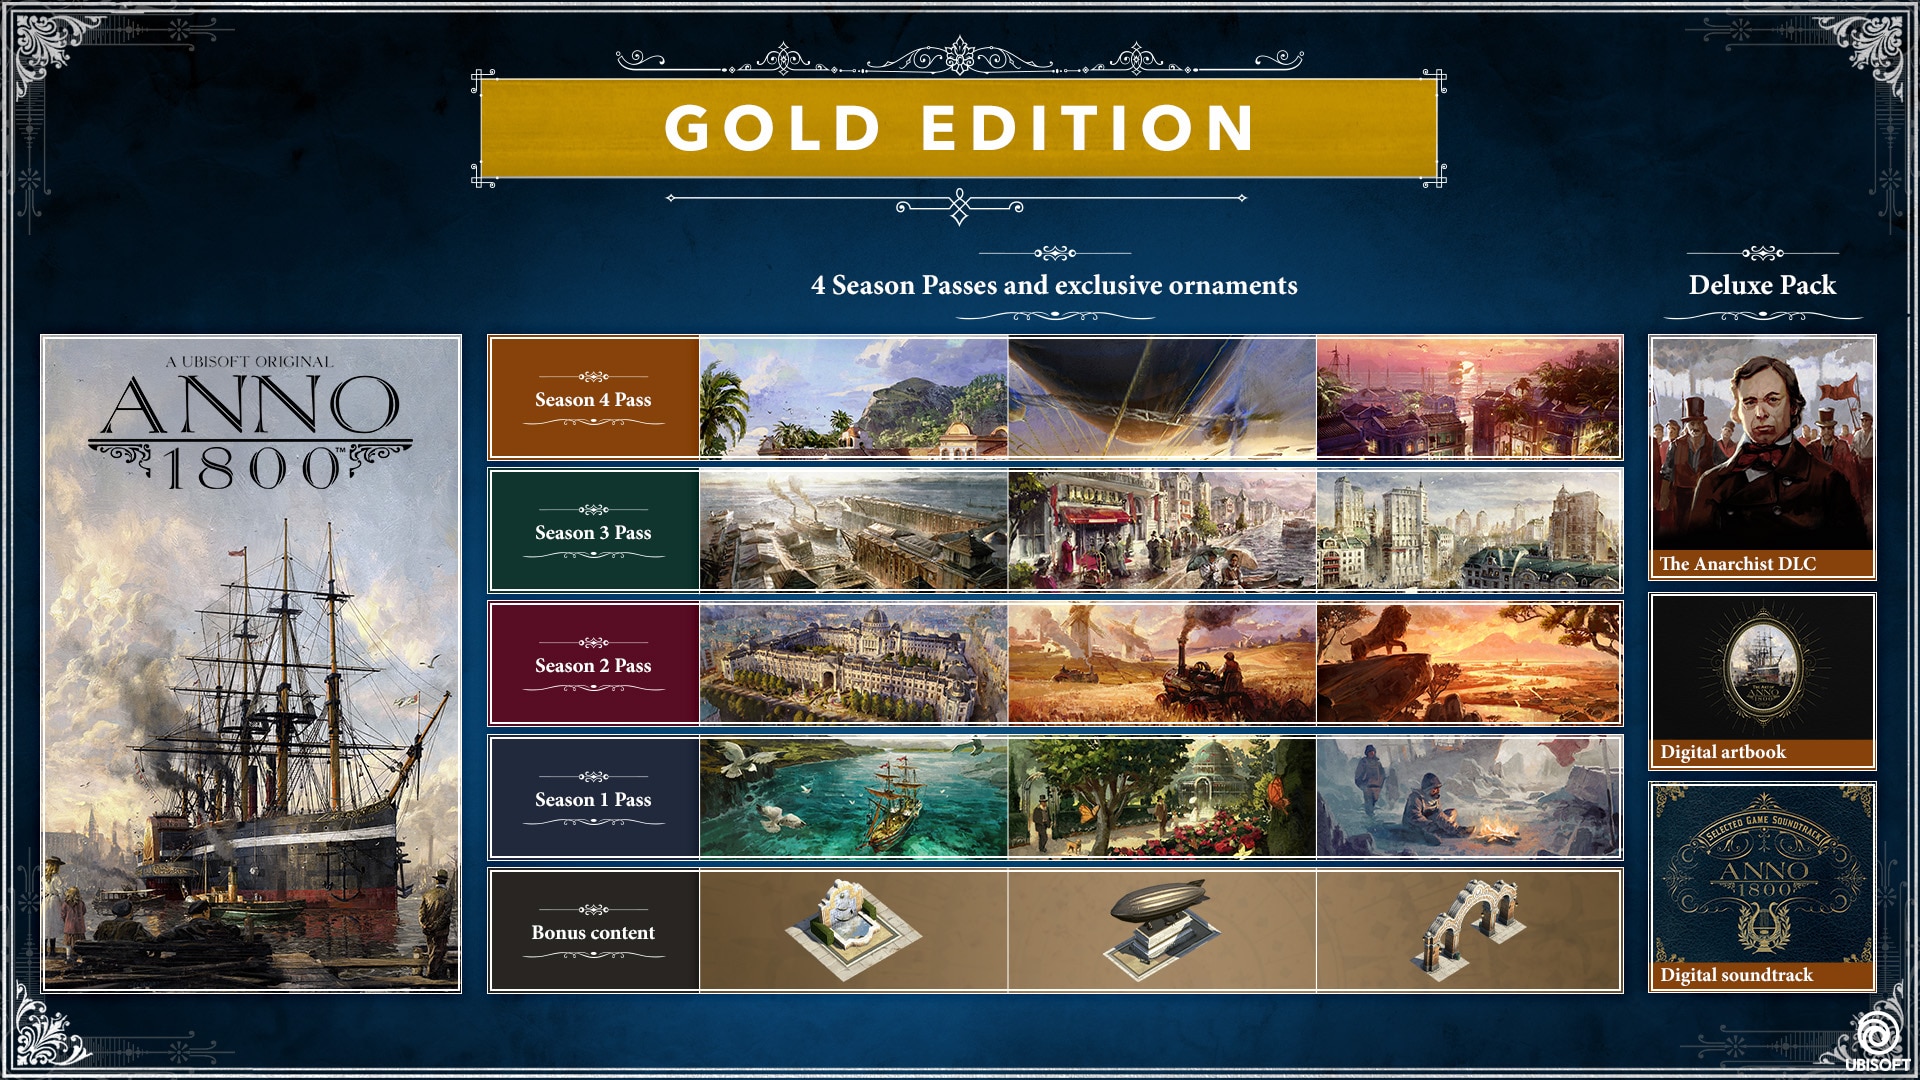 Contents of Anno 1800 | Ubisoft editions Help